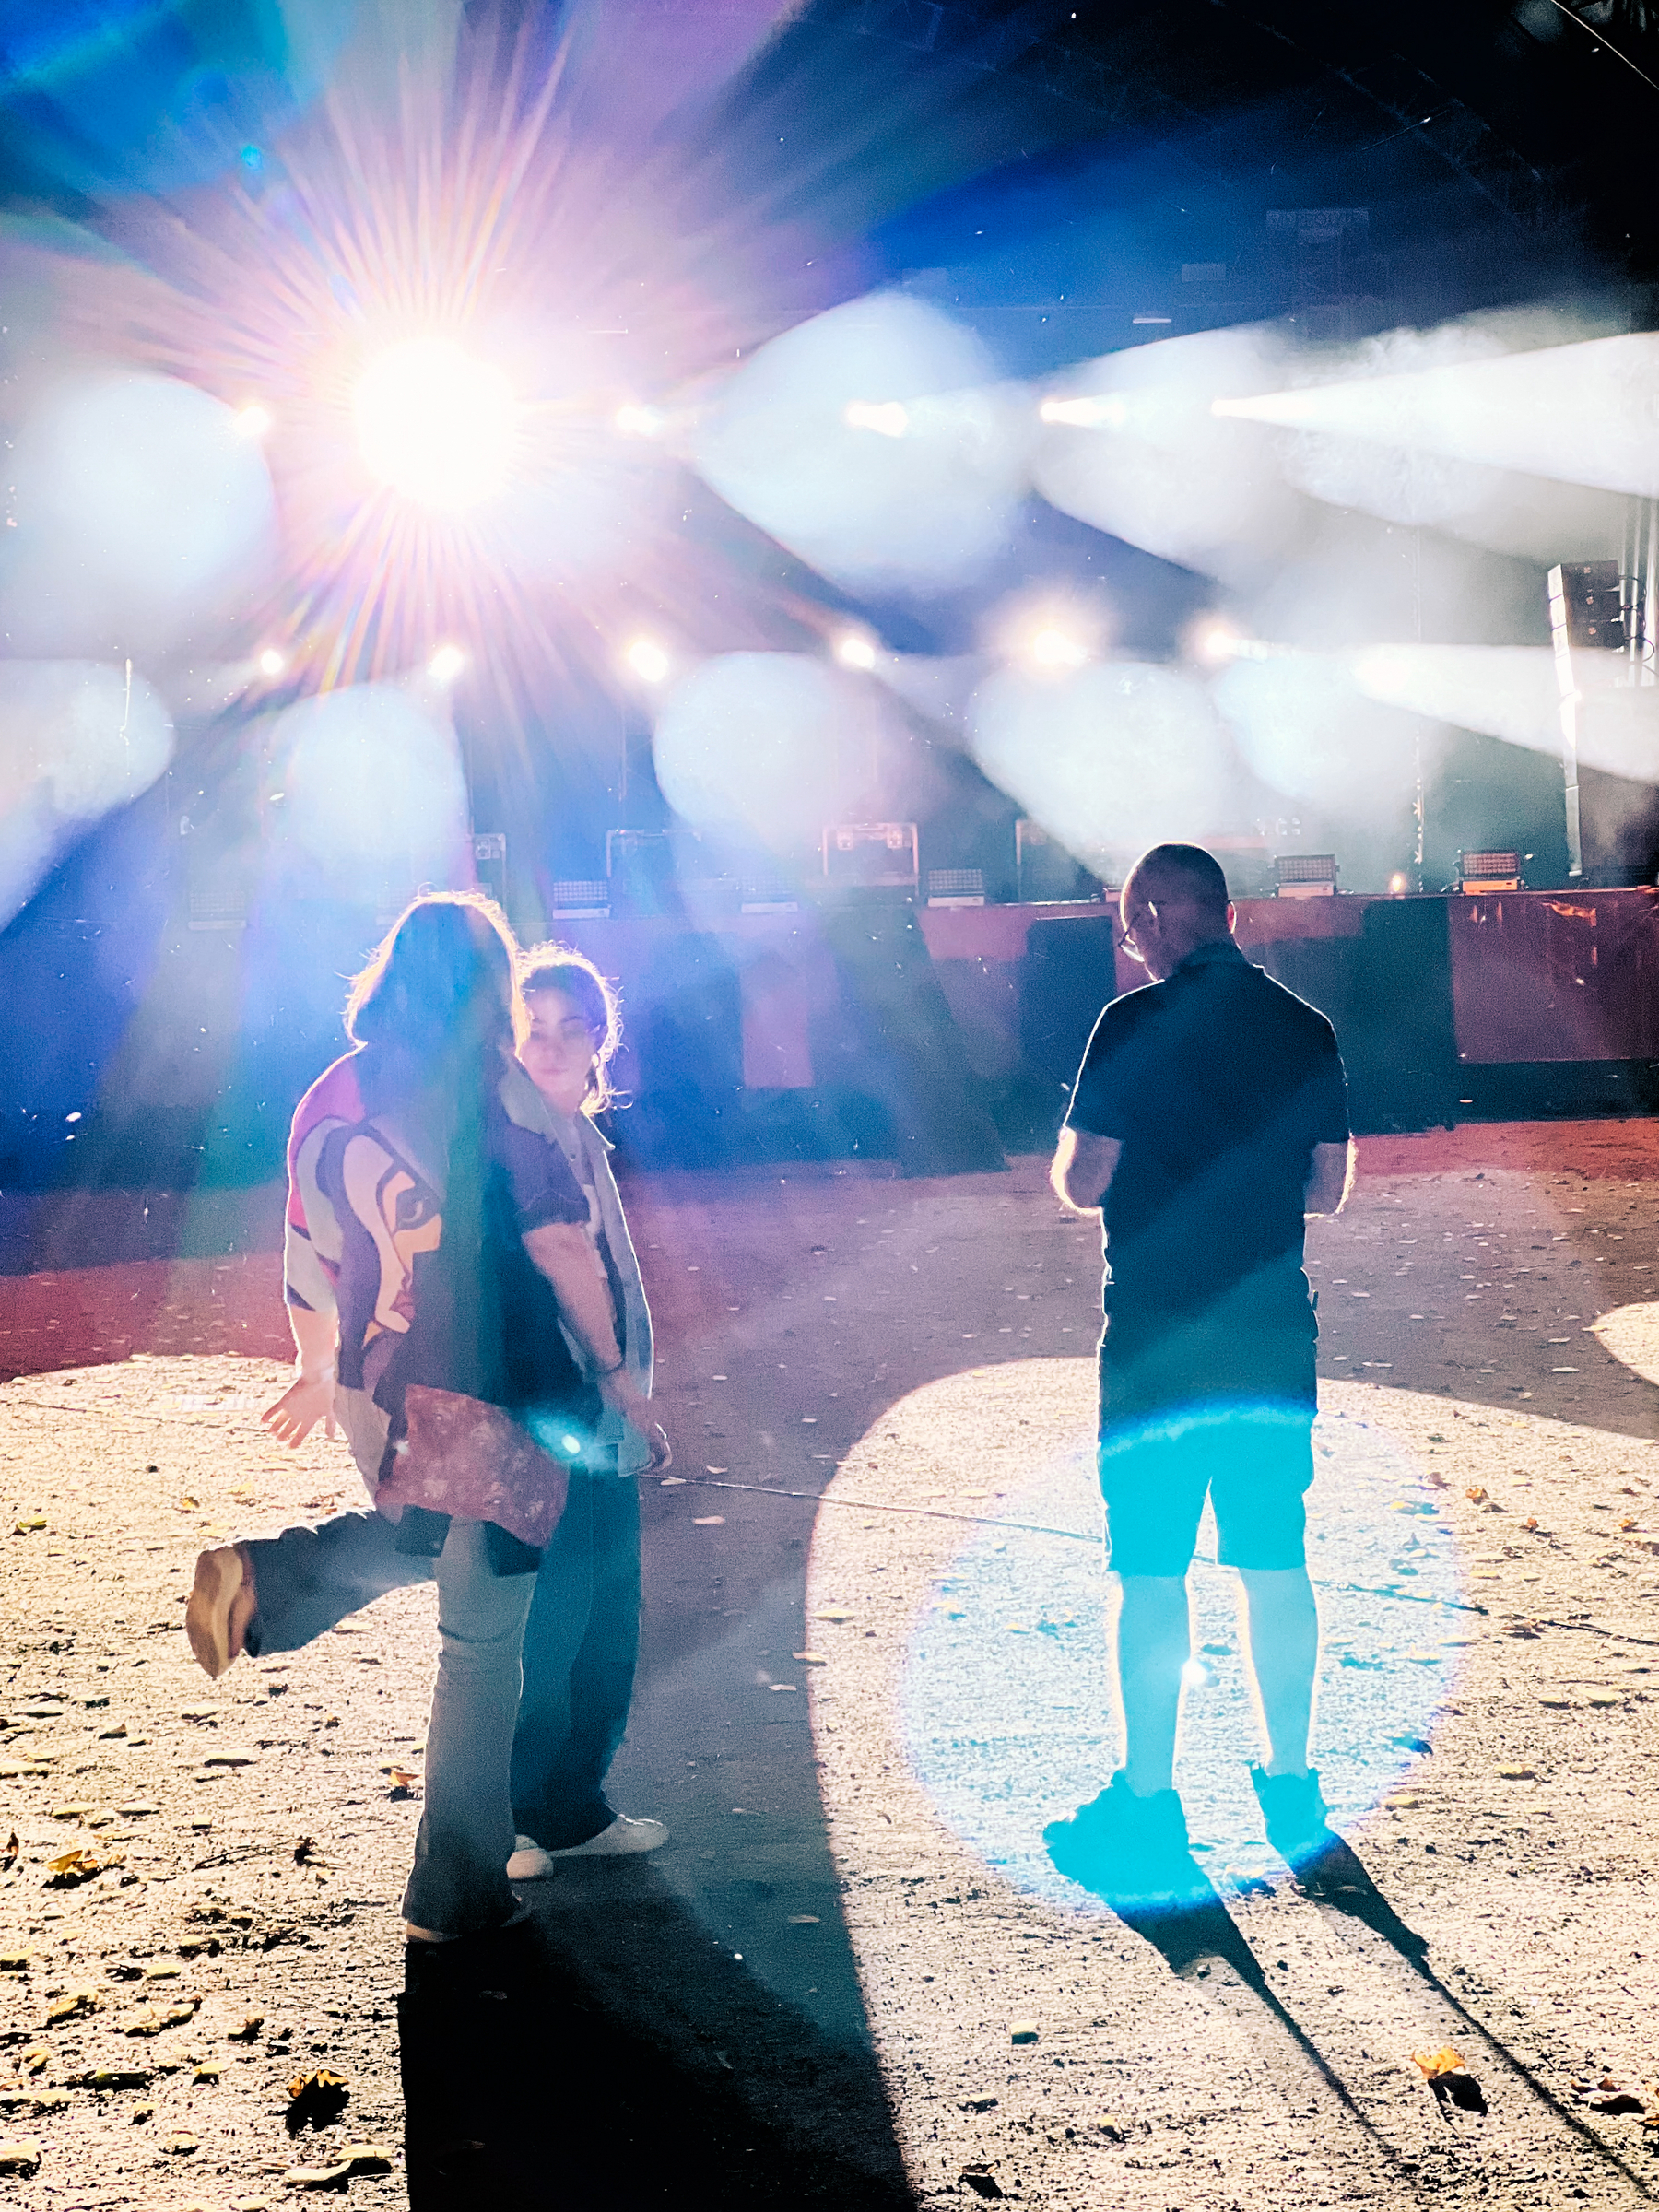 Three people standing in front of an impressive light show coming from a stage.